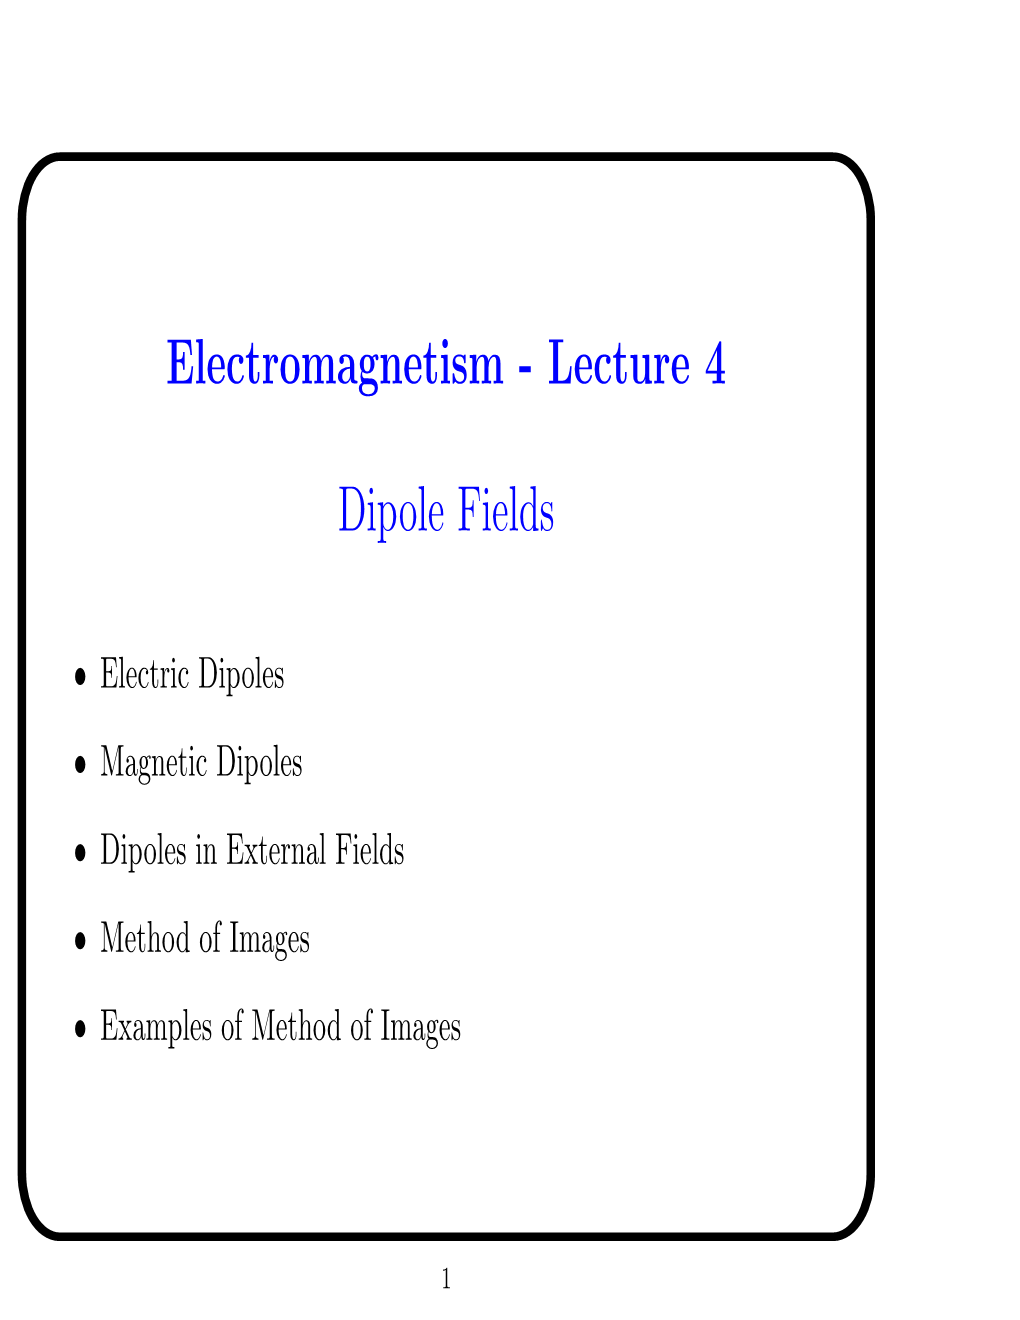 Electromagnetism - Lecture 4